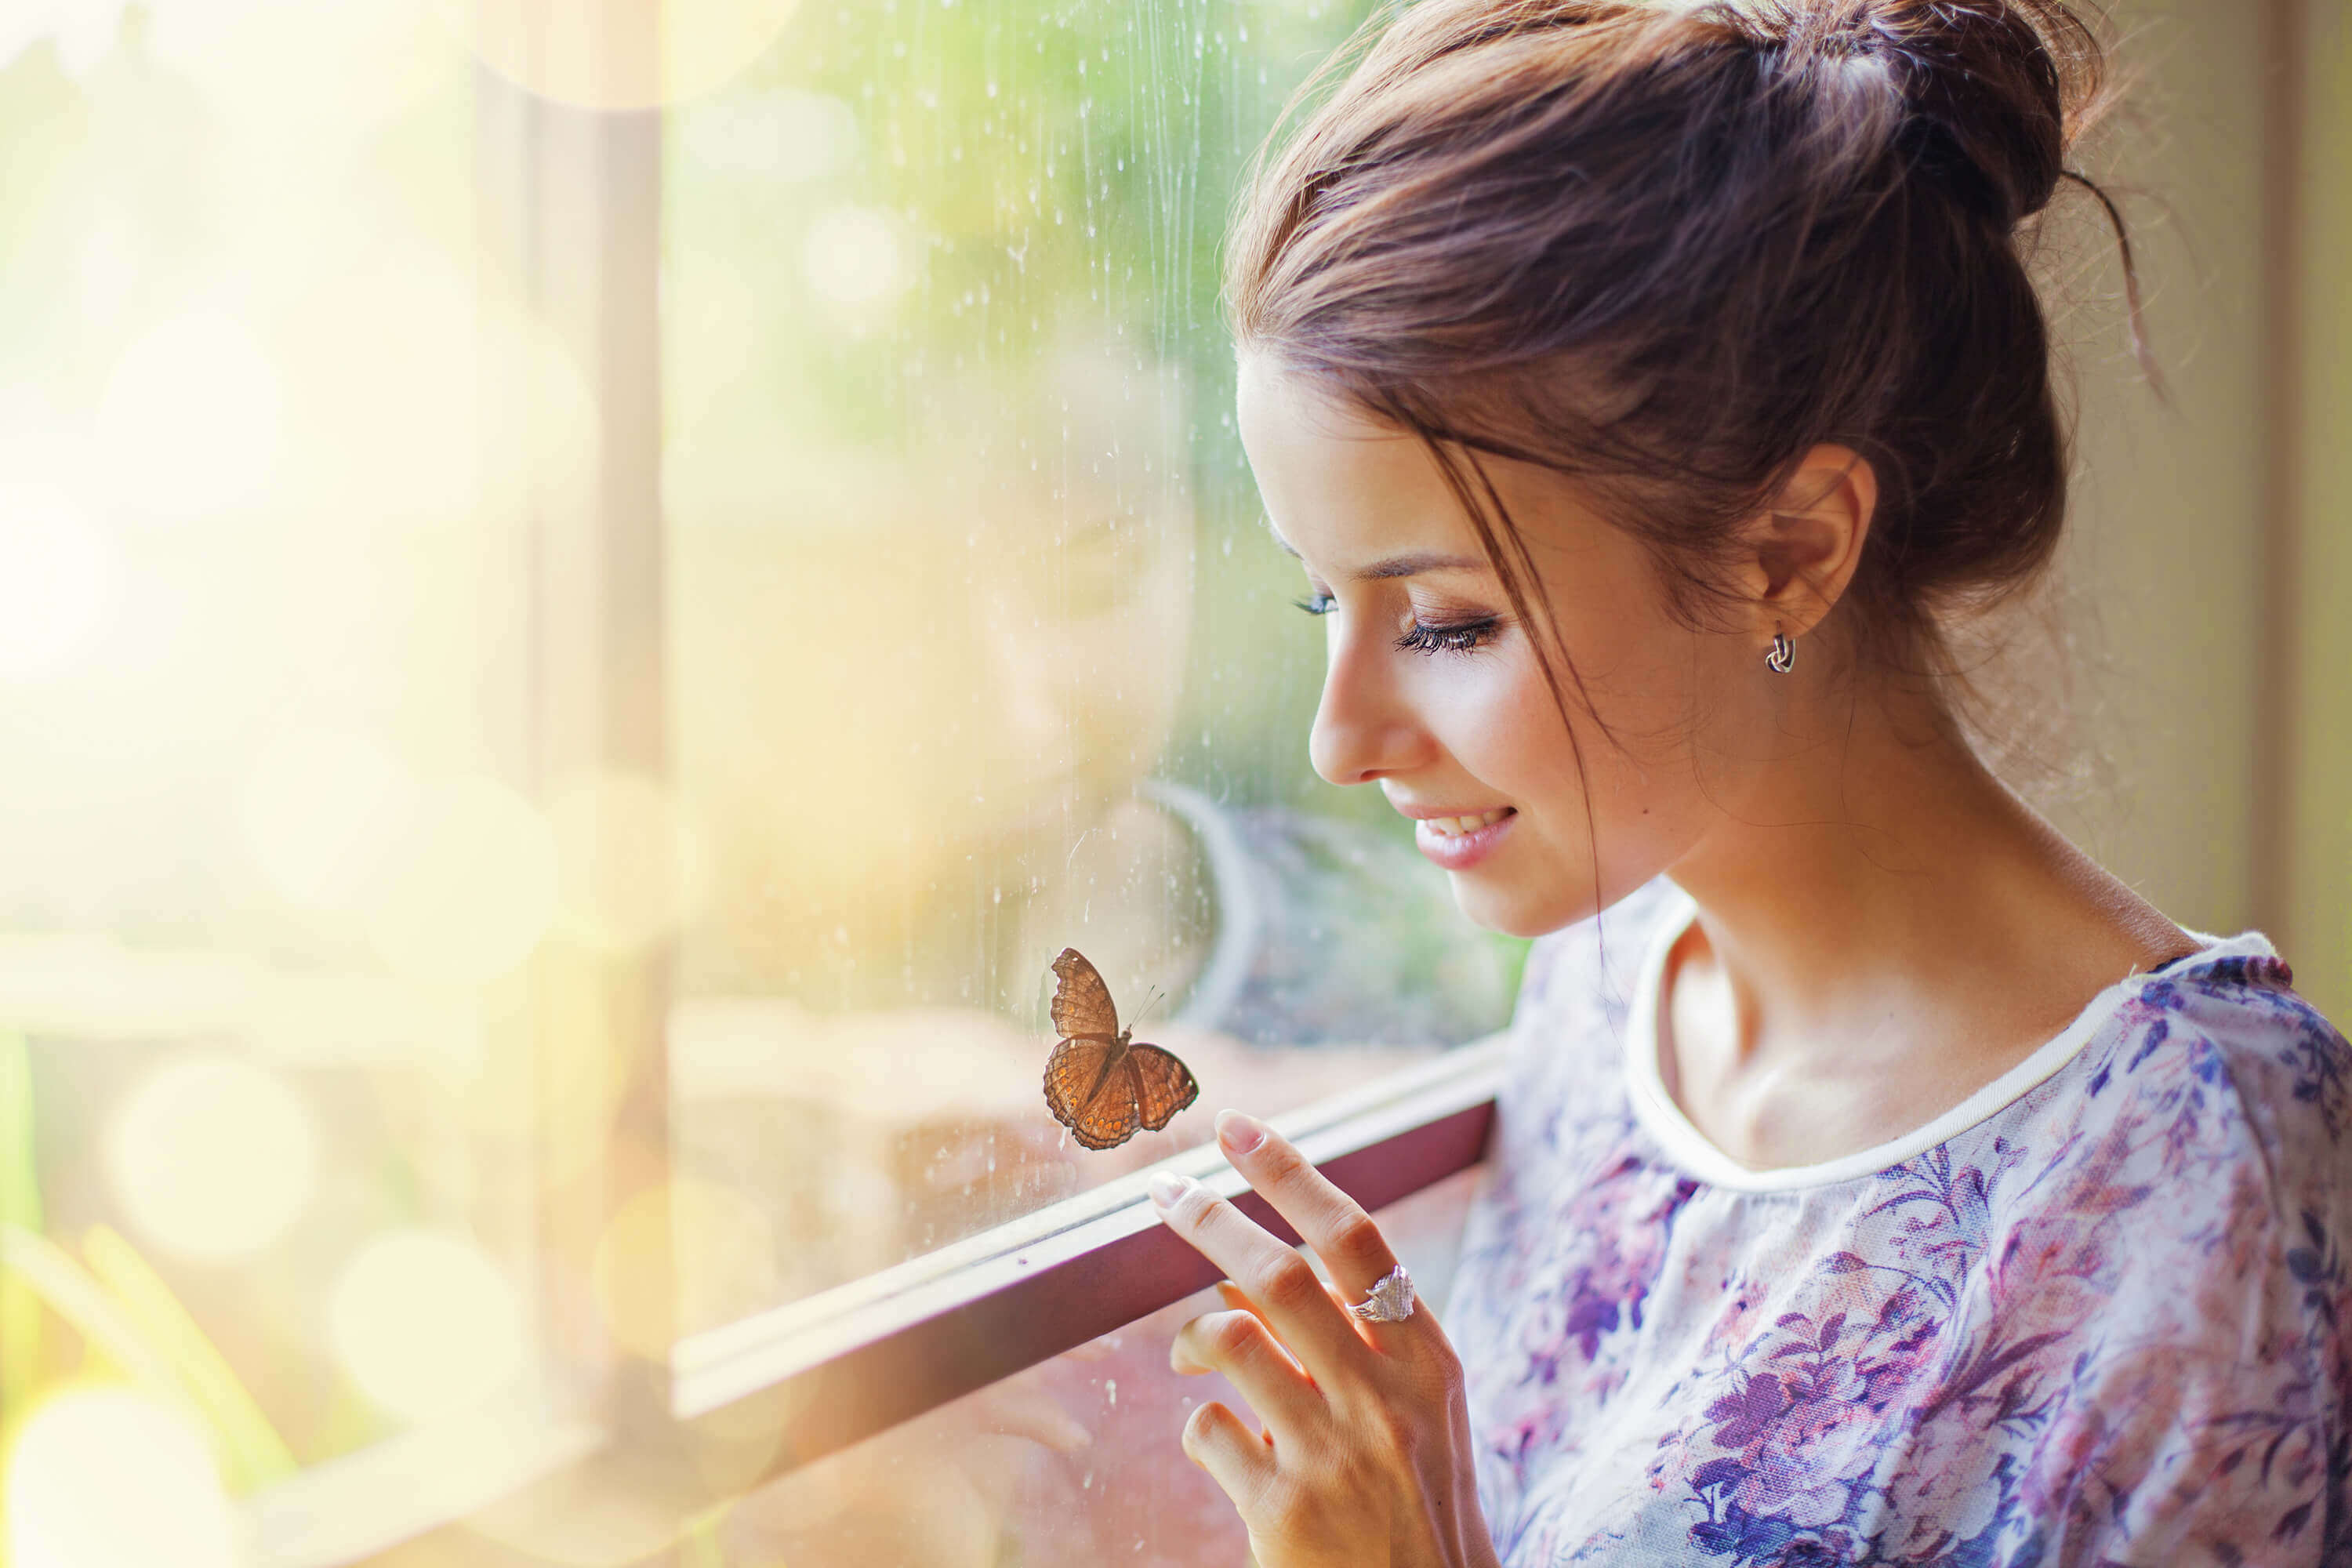 10 Incredible Habits That Will Simplify Your Life